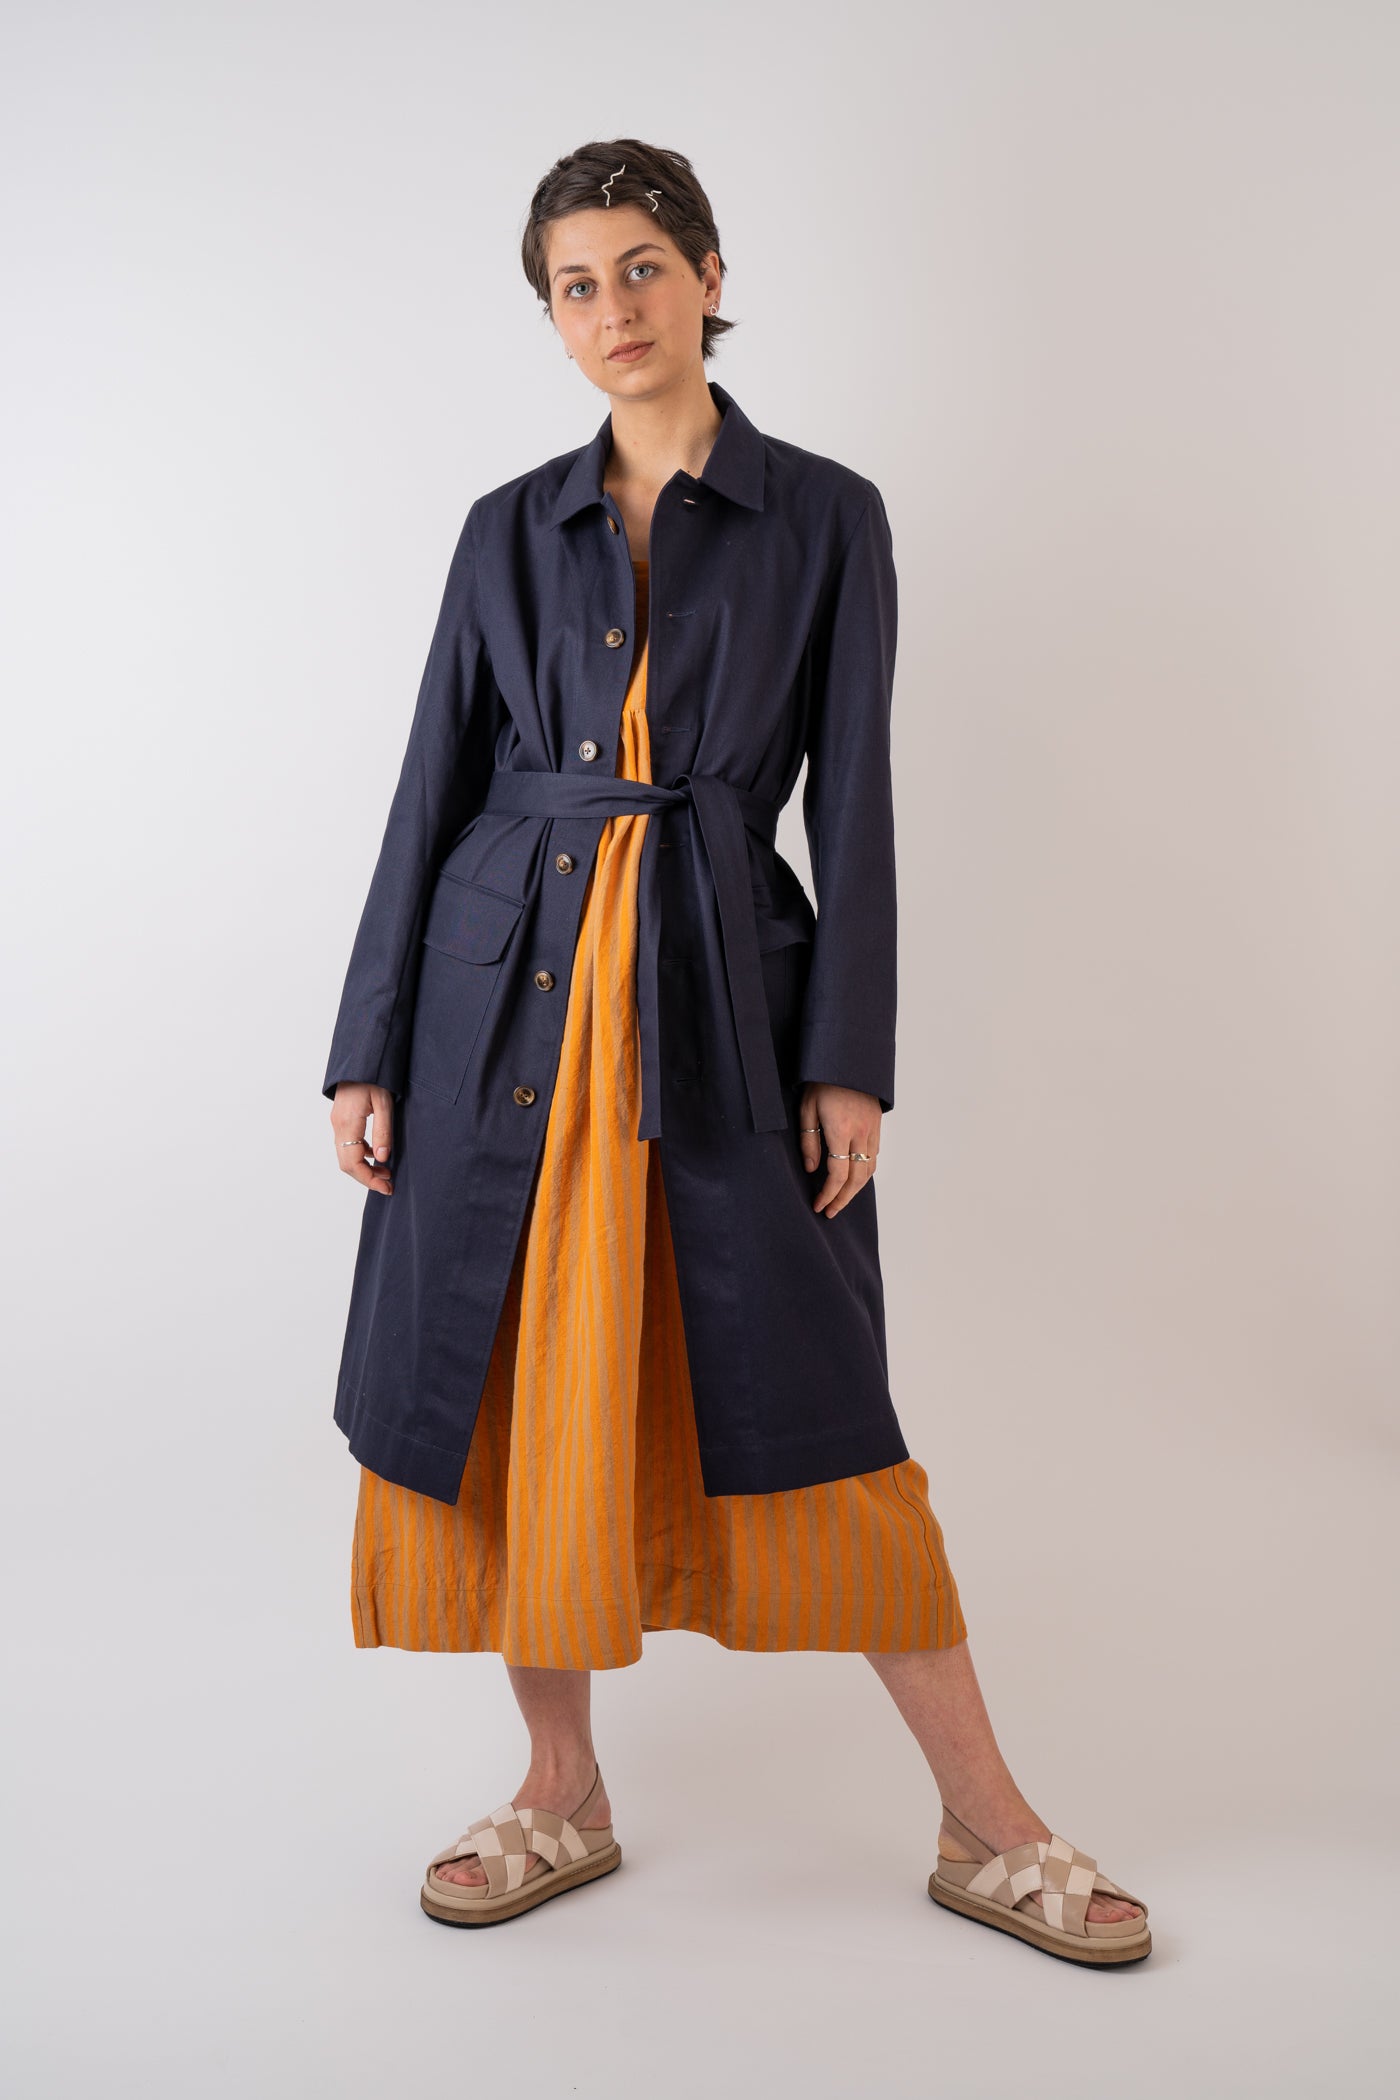 Xi Atelier Organic Cotton Drill Yves Coat in Navy handmade in Glasglow styled with Cawley Studio Elba Linen Stripe Dress